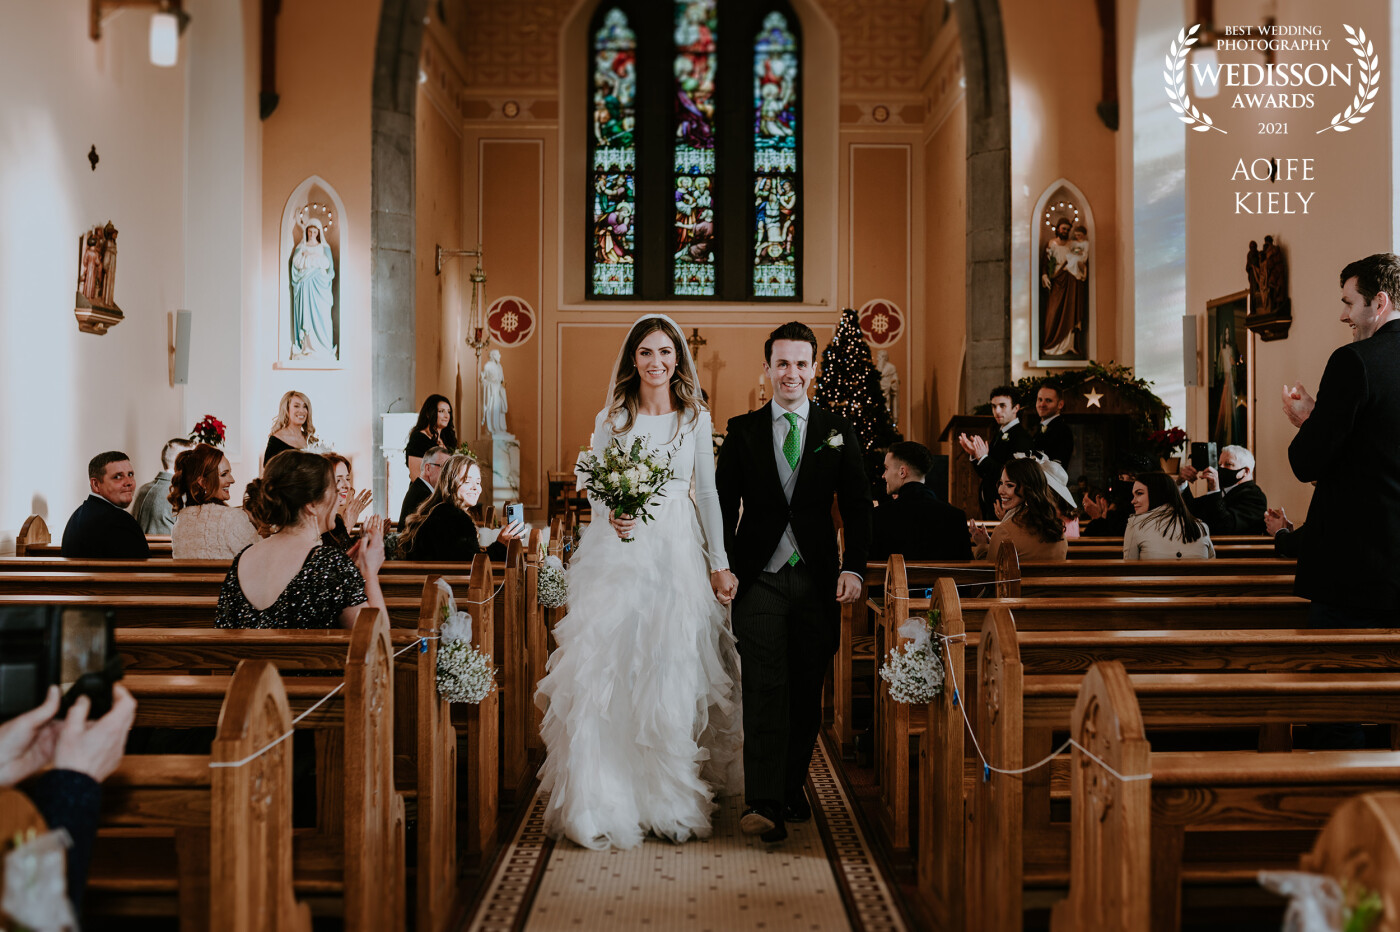 John & Deirdre walking down the aisle as husband & wife. They both planned the wedding in less than a week and it was absolutely stunning!